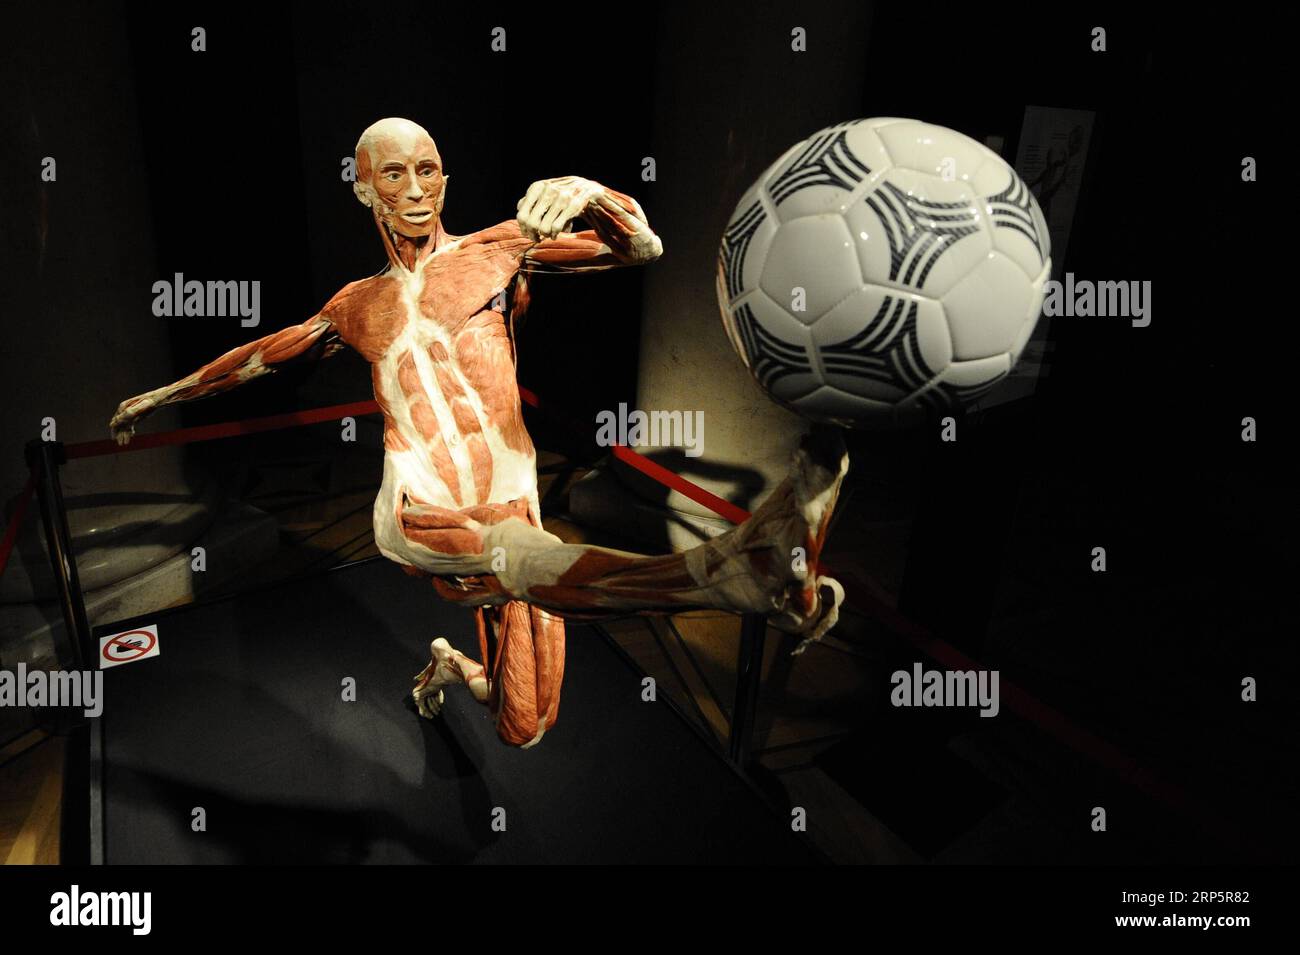 (181221) -- WARSAW, Dec. 21, 2018 -- The body of a footballer is seen at the Body Worlds exhibition at the Palace of Culture and Science in Warsaw, Poland, on Dec. 21, 2018. The Body Worlds exhibition displays dissected human bodies and animals. It was first presented in Tokyo in 1995. ) POLAND-WARSAW-BODY WORLDS-EXHIBITION JaapxArriens PUBLICATIONxNOTxINxCHN Stock Photo